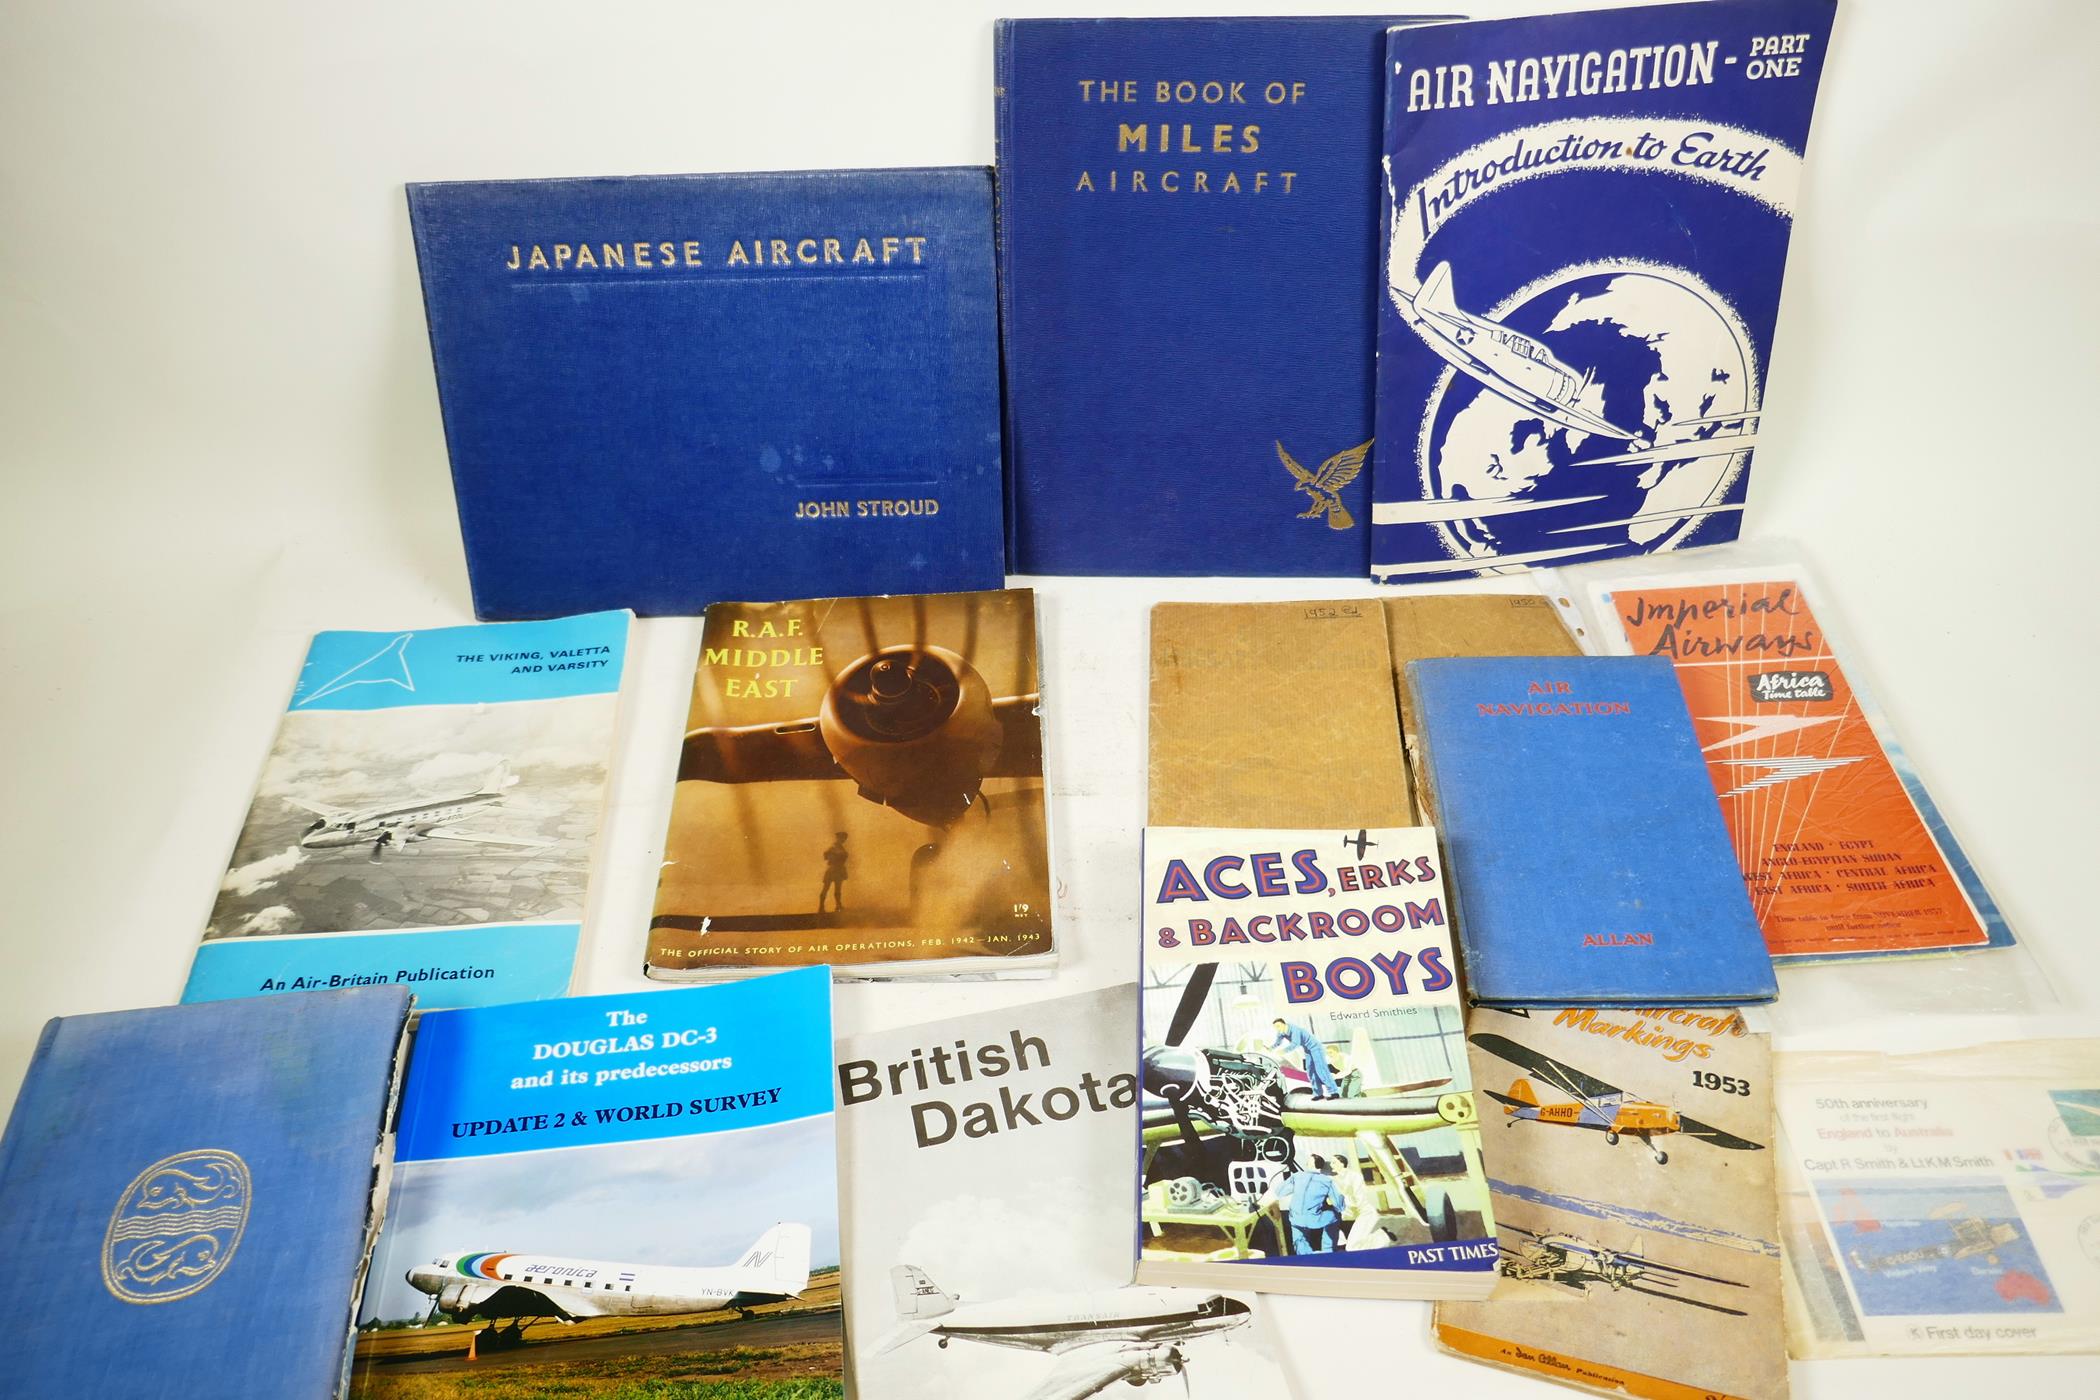 A quantity of aviation related booklets and magazines including Japanese aircraft and Miles Aircraft